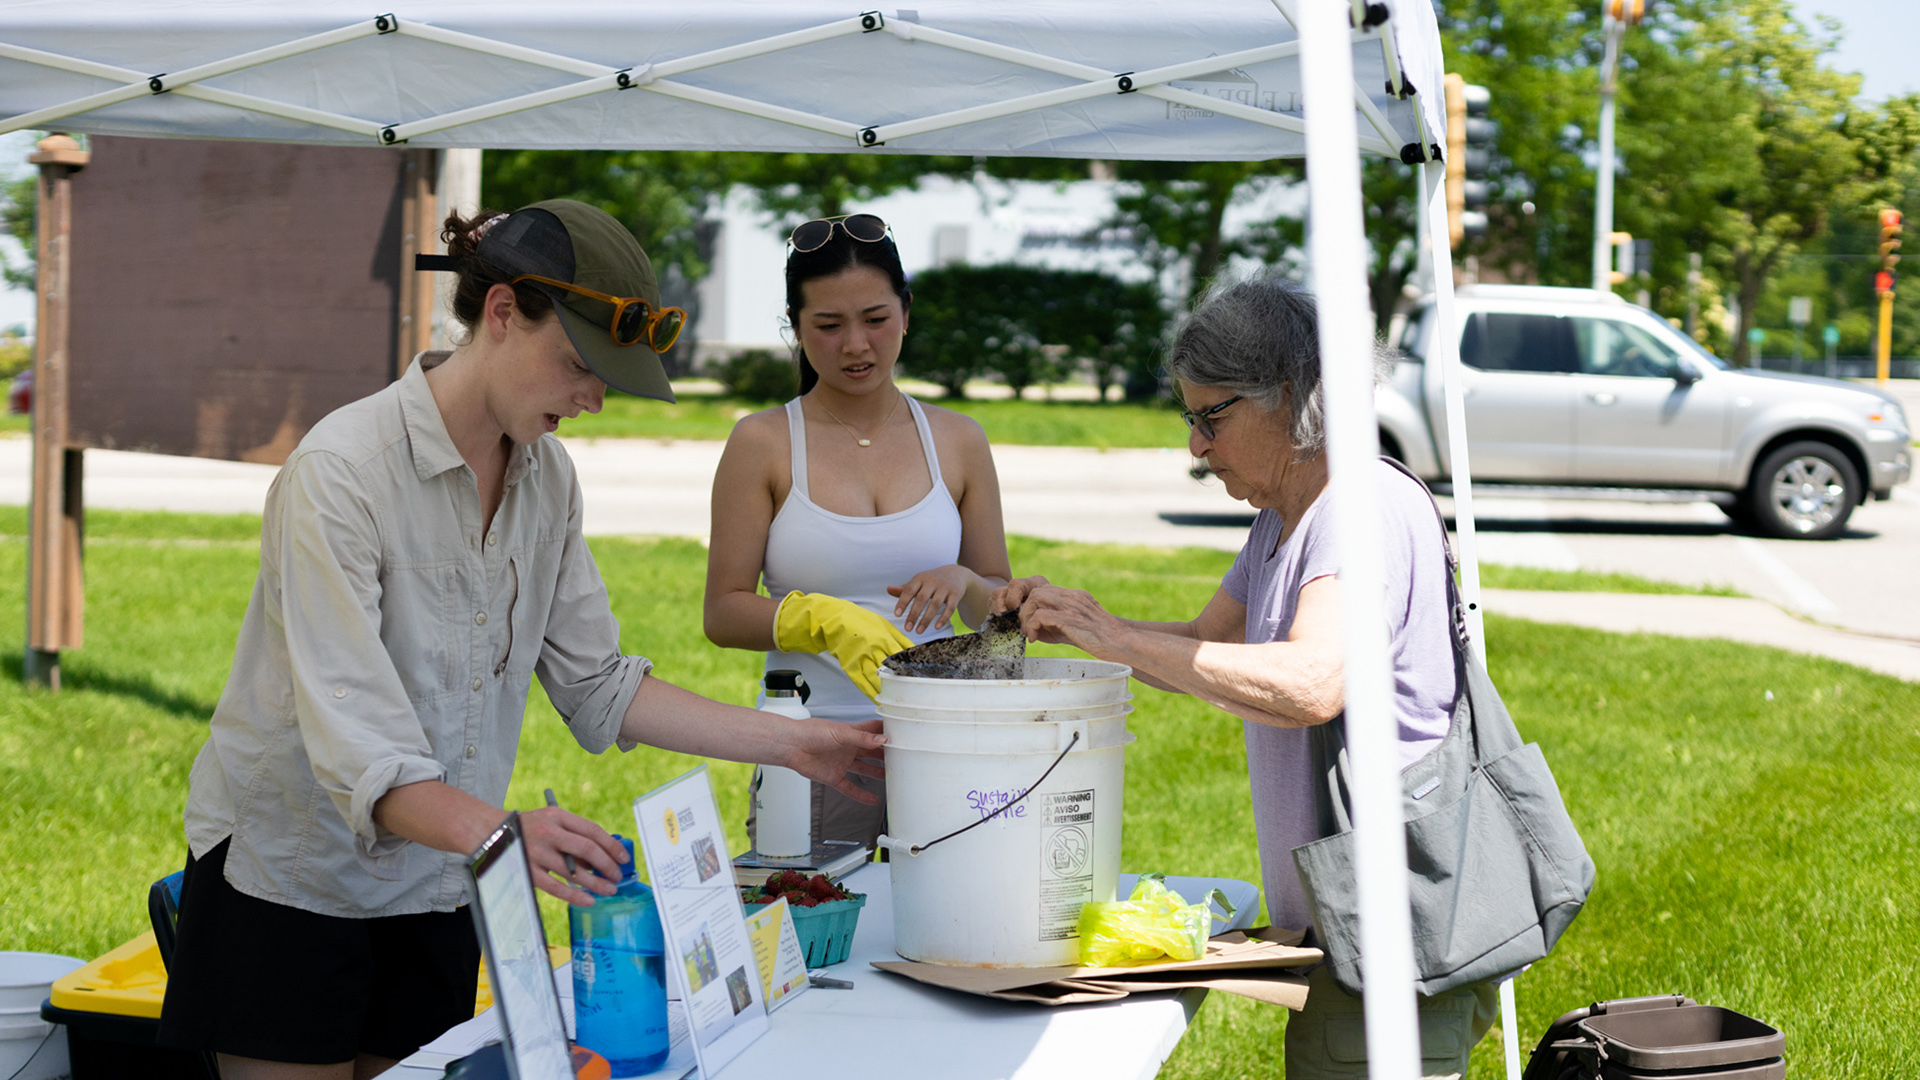 Three people stand around a table standing on a lawn under an outdoor canopy tent, with two helping the third empty food scraps into a five-gallon plastic bucket.